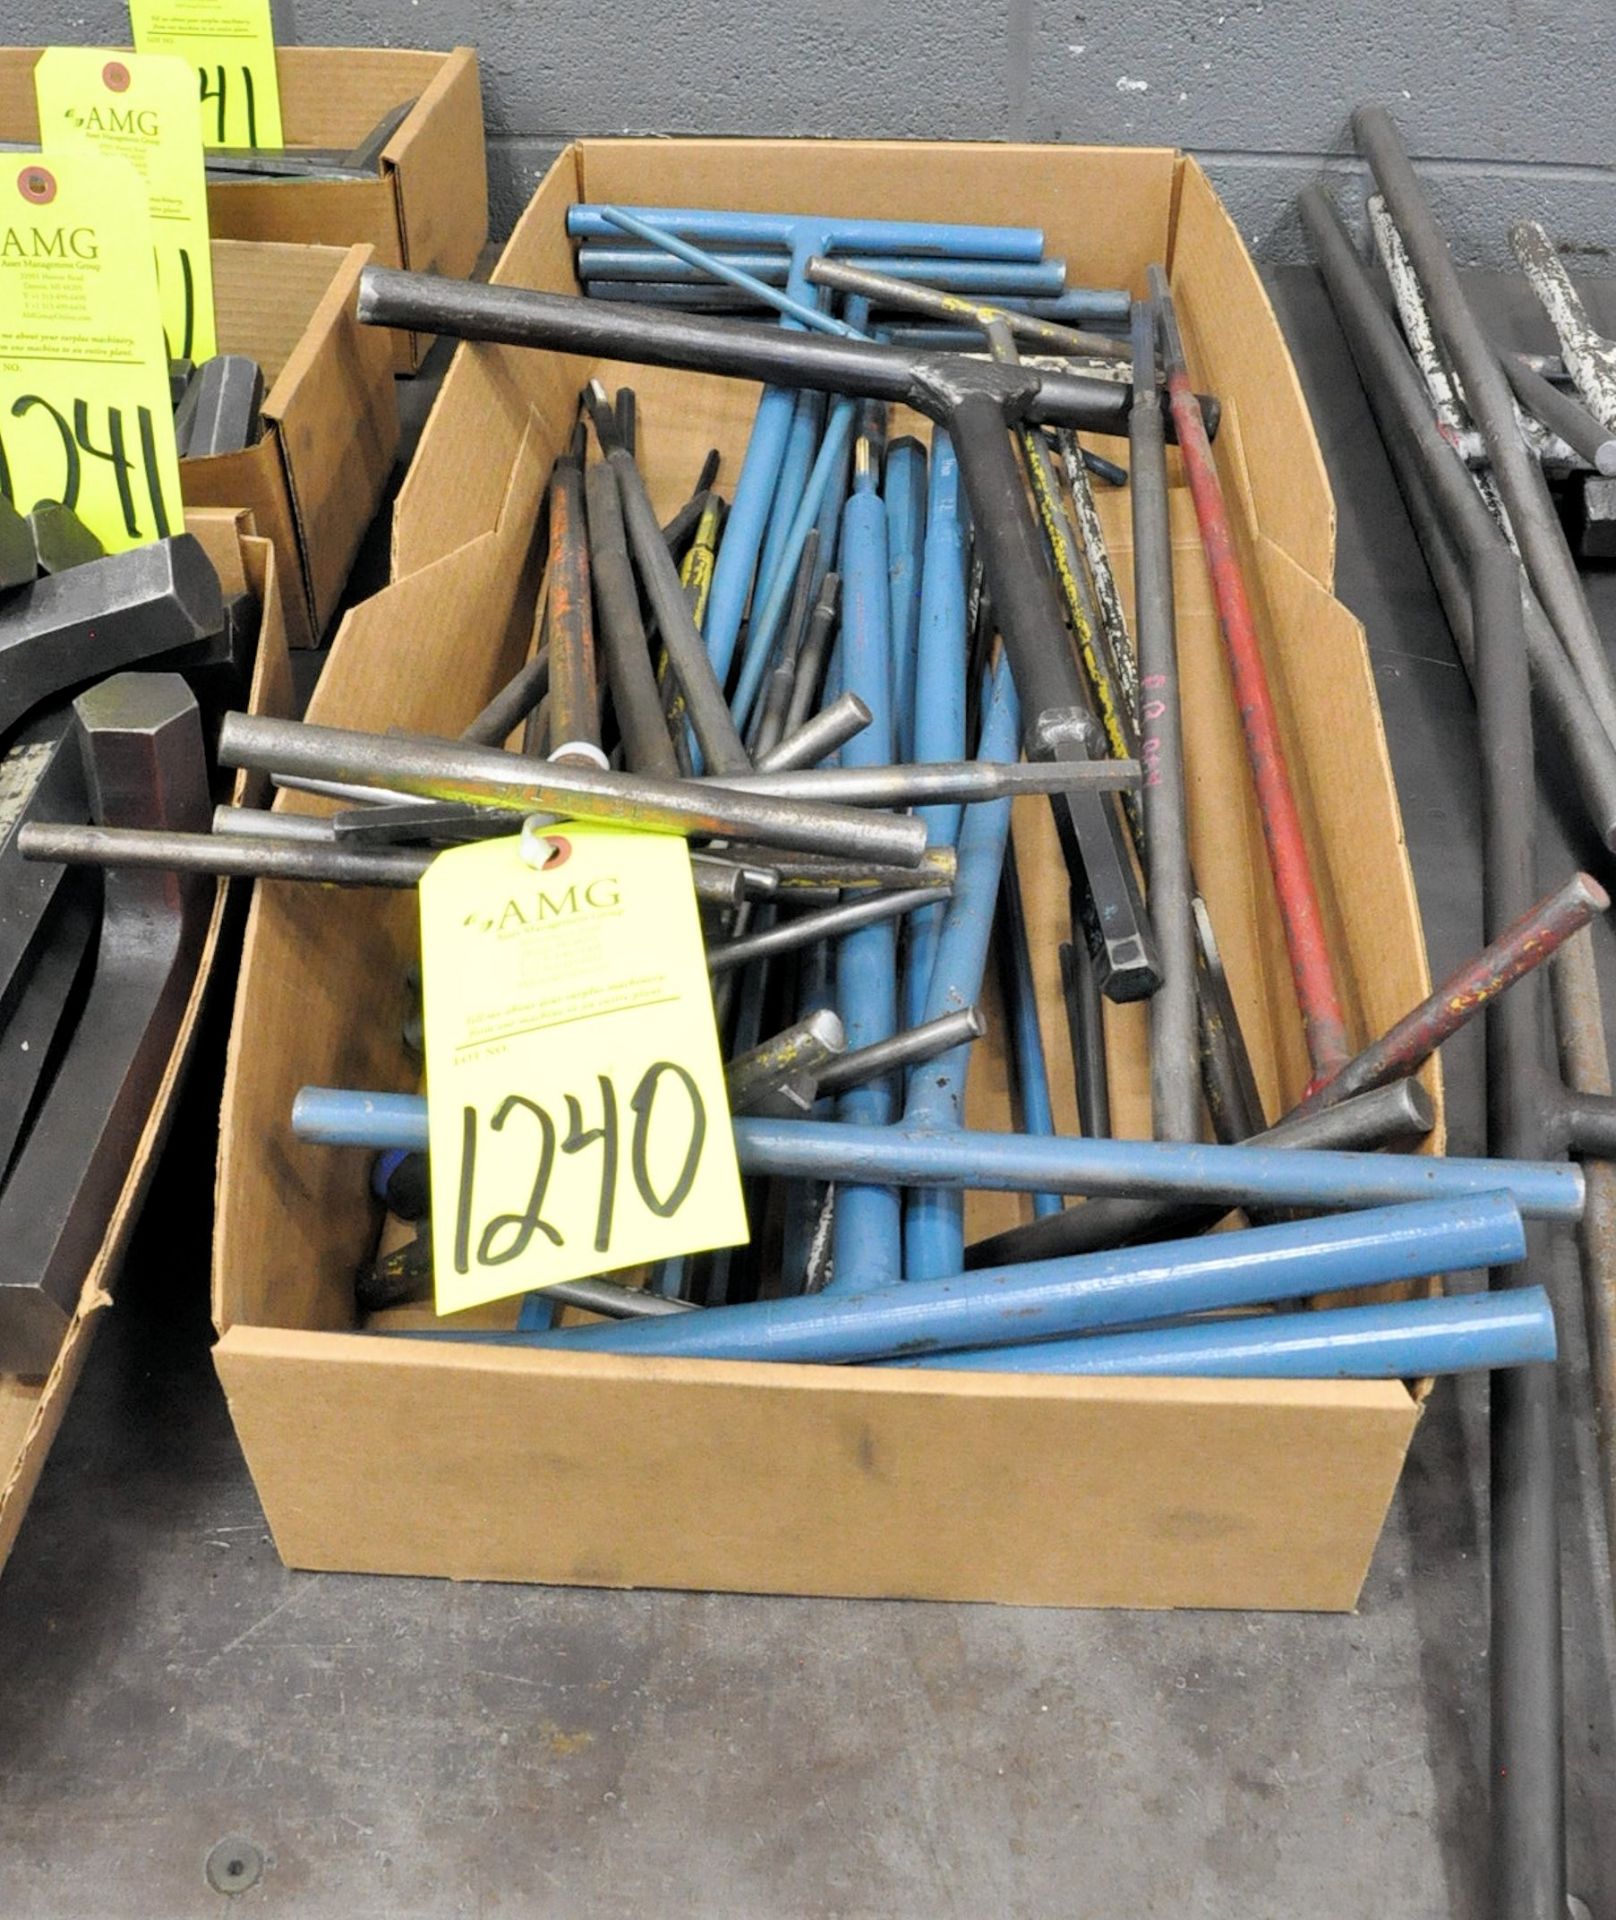 Lot-Long Handle Allen Wrenches in (3) Bundles and (1) Box, (G-15), (Yellow Tag) - Image 2 of 2